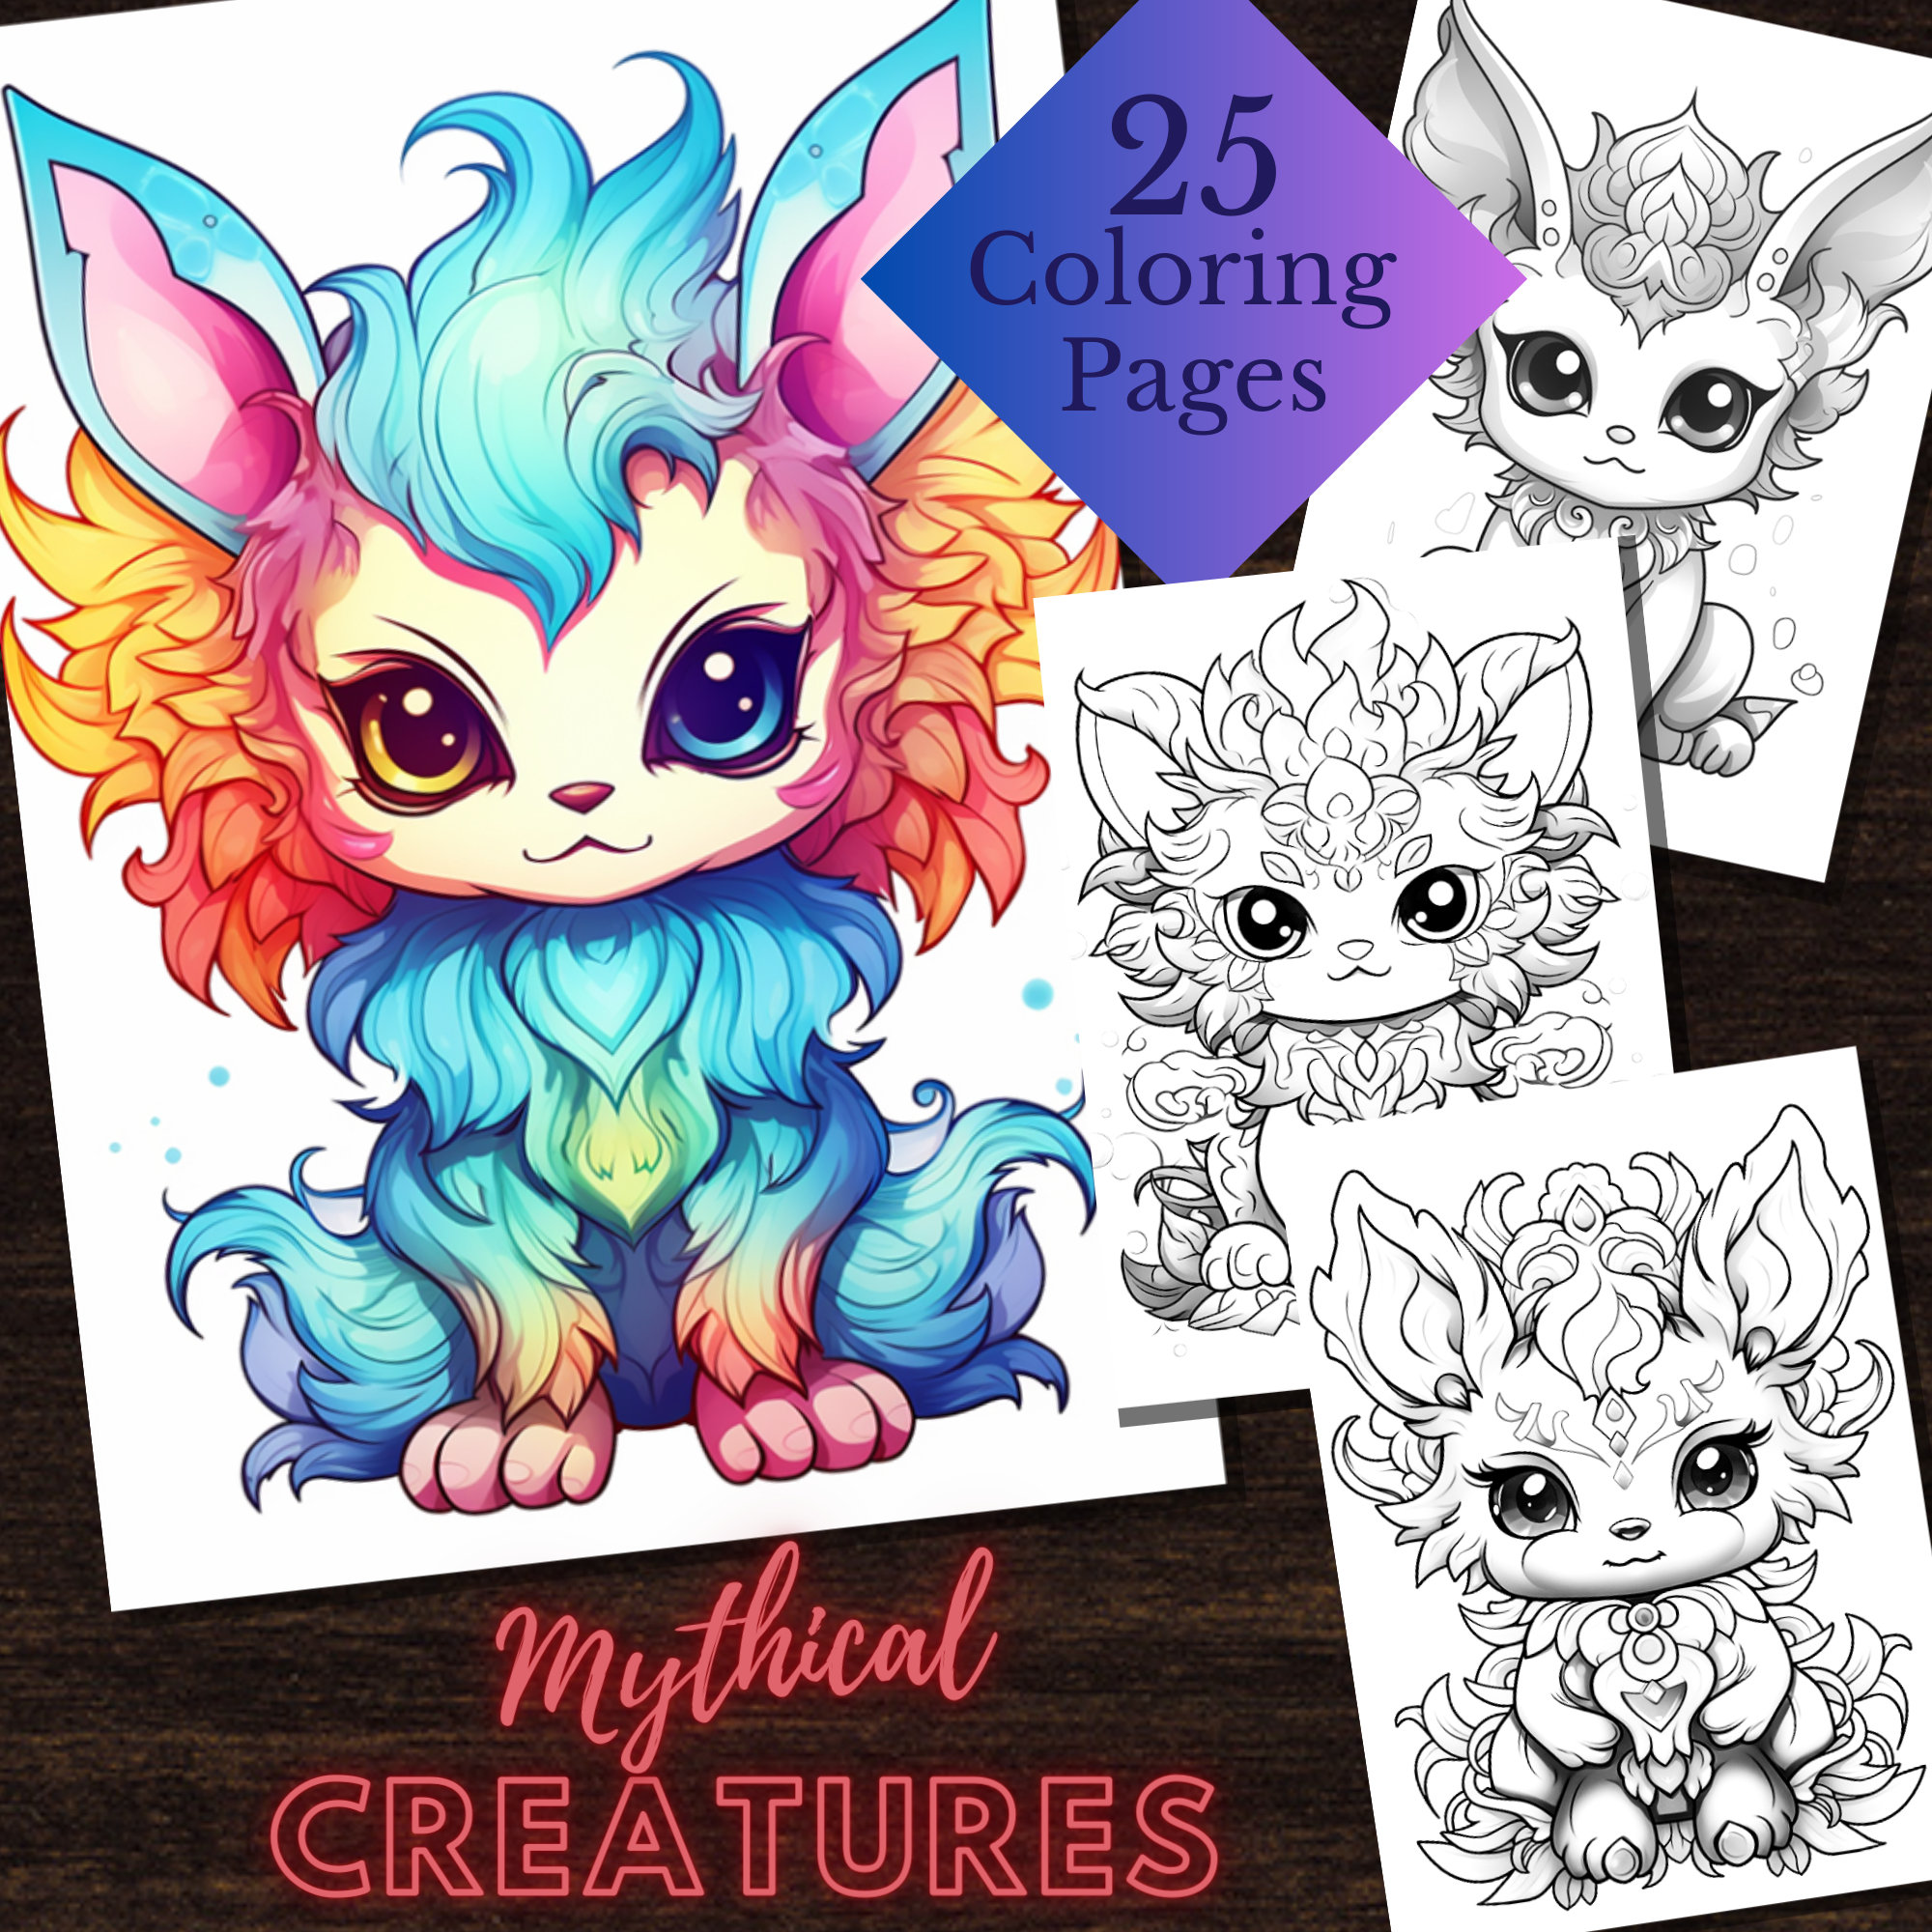 Baby mythical creatures grayscale coloring pages digital coloring pages